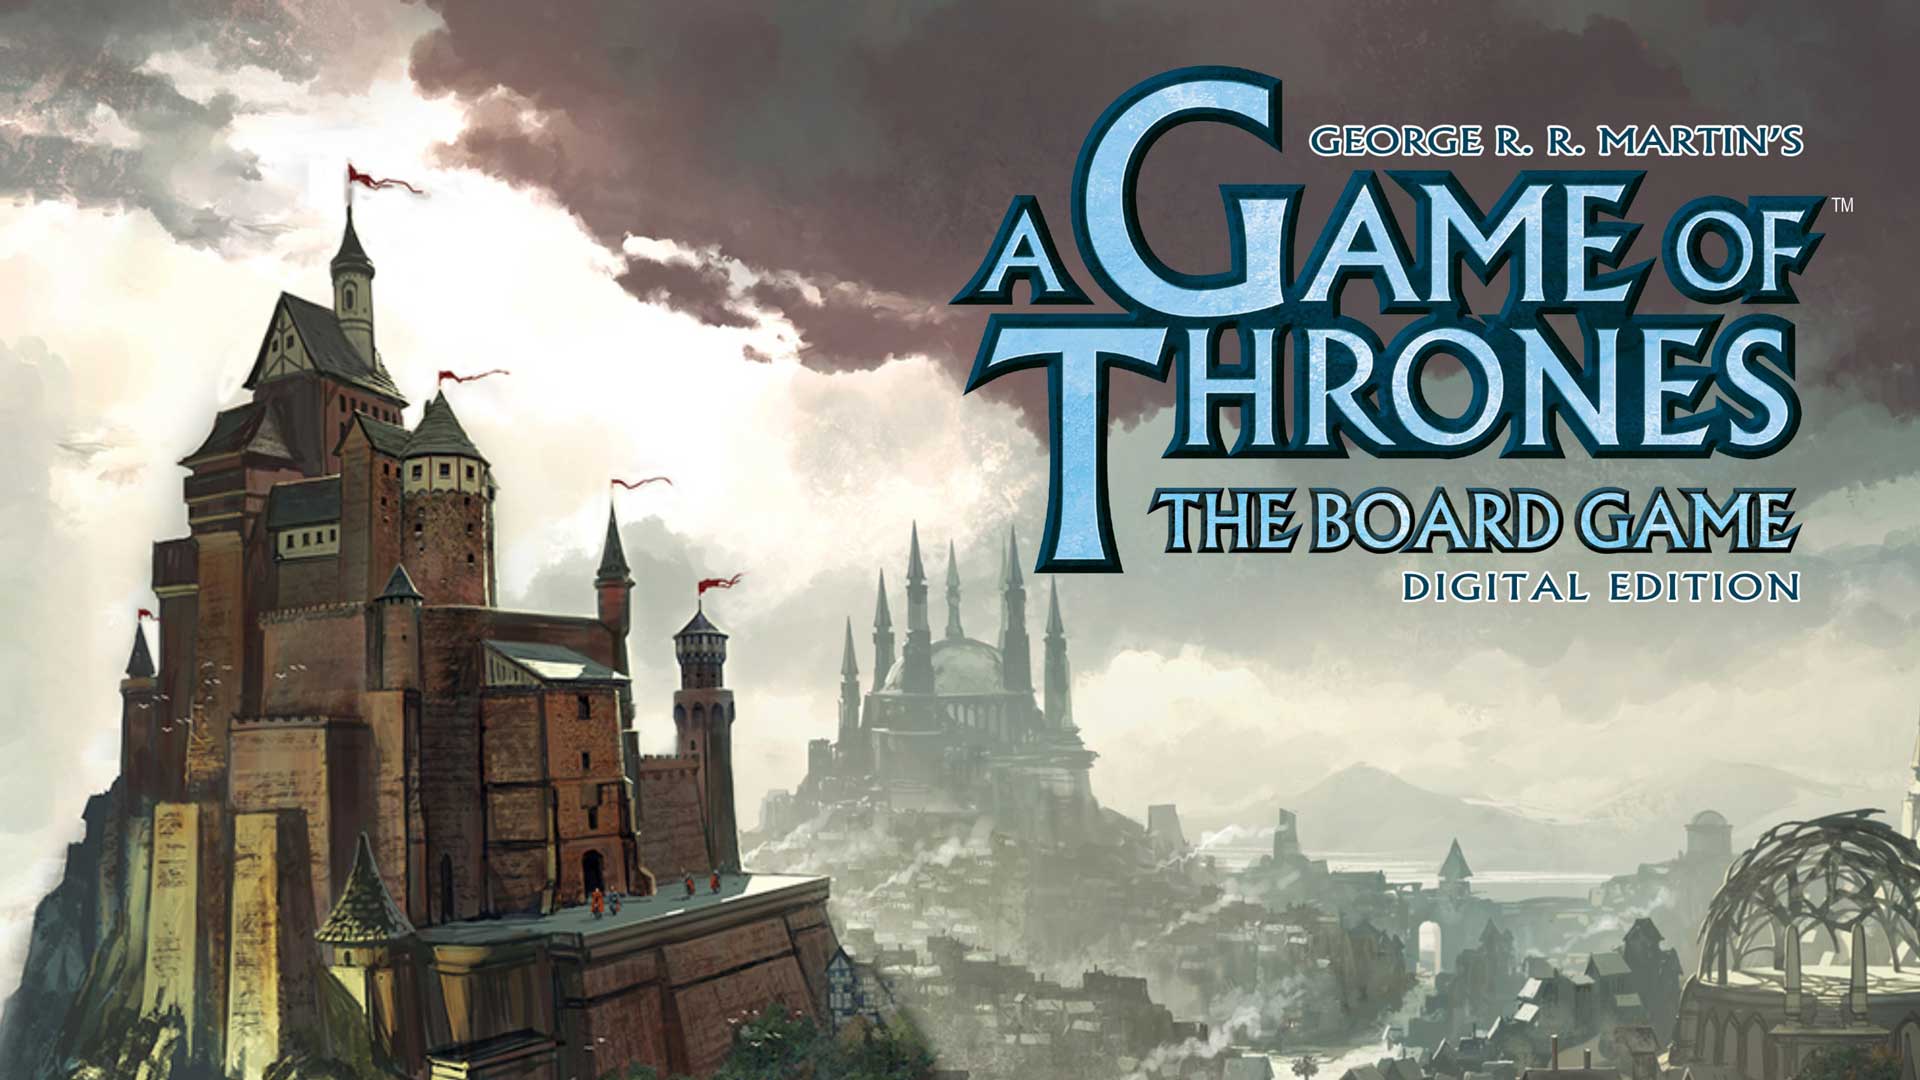 A Game of Thrones: The Board Game and Car Mechanic Simulator 2018 are free at Epic Games Store